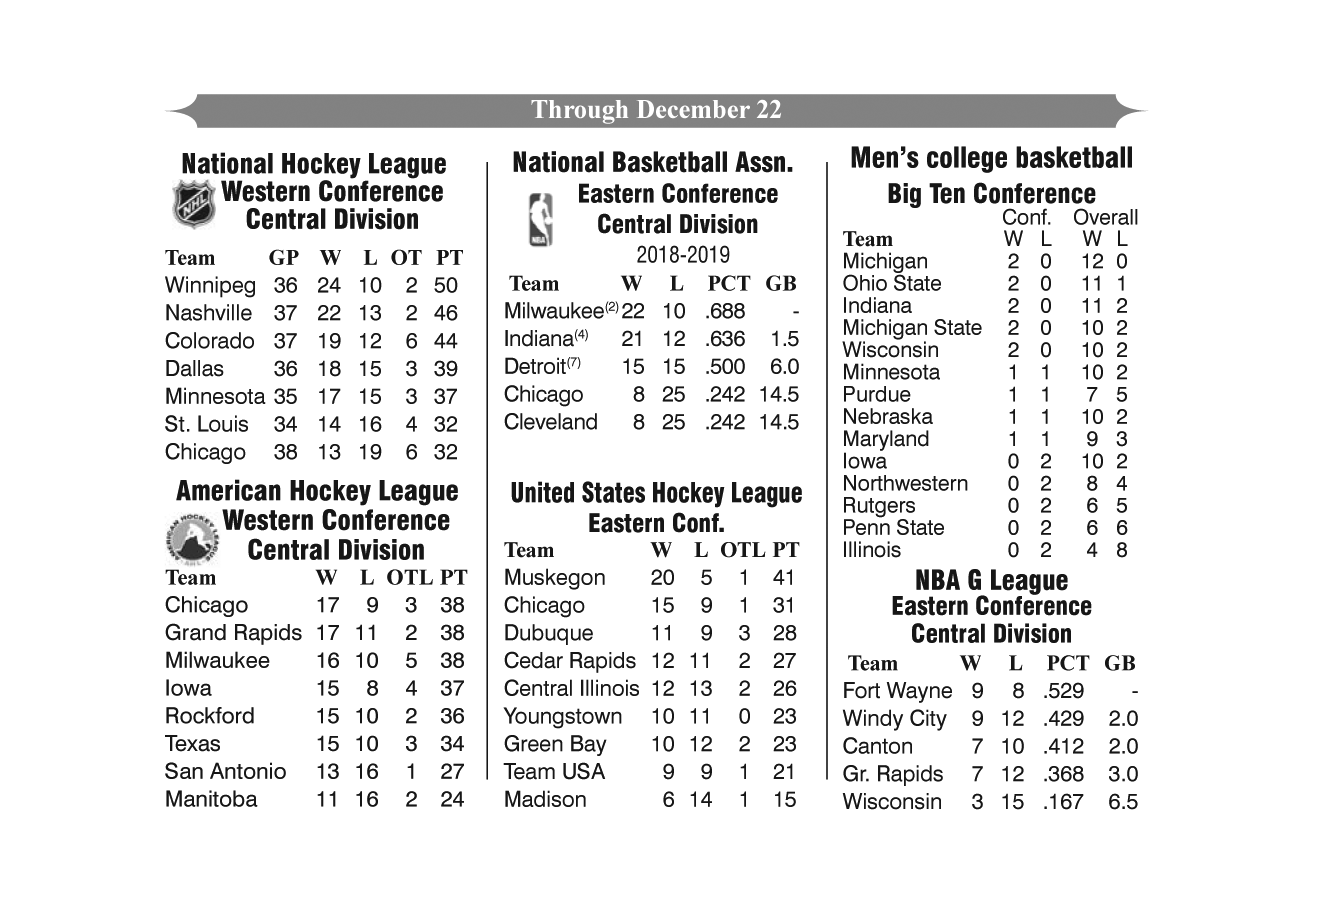 Professional Basketball and Hockey Standings Through December 22, 2018